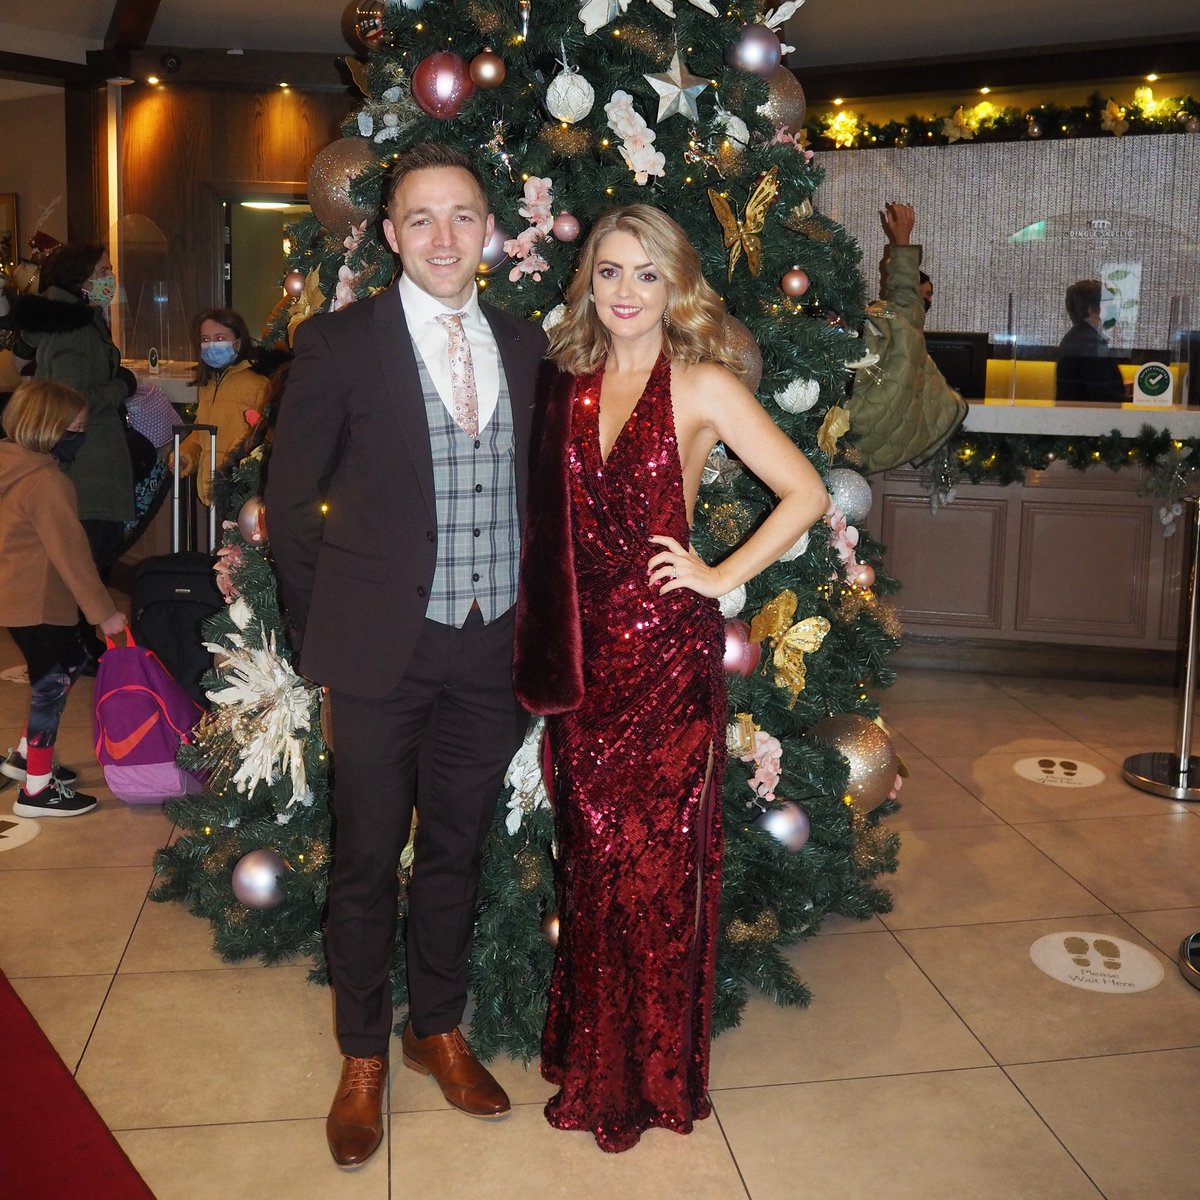 A fantastic weekend was had @Darransull86 🎉 🎊🍻thank you @colmcooper13 & Ceitilis 🎀 #ChristmasSparkle #ChristmasWedding